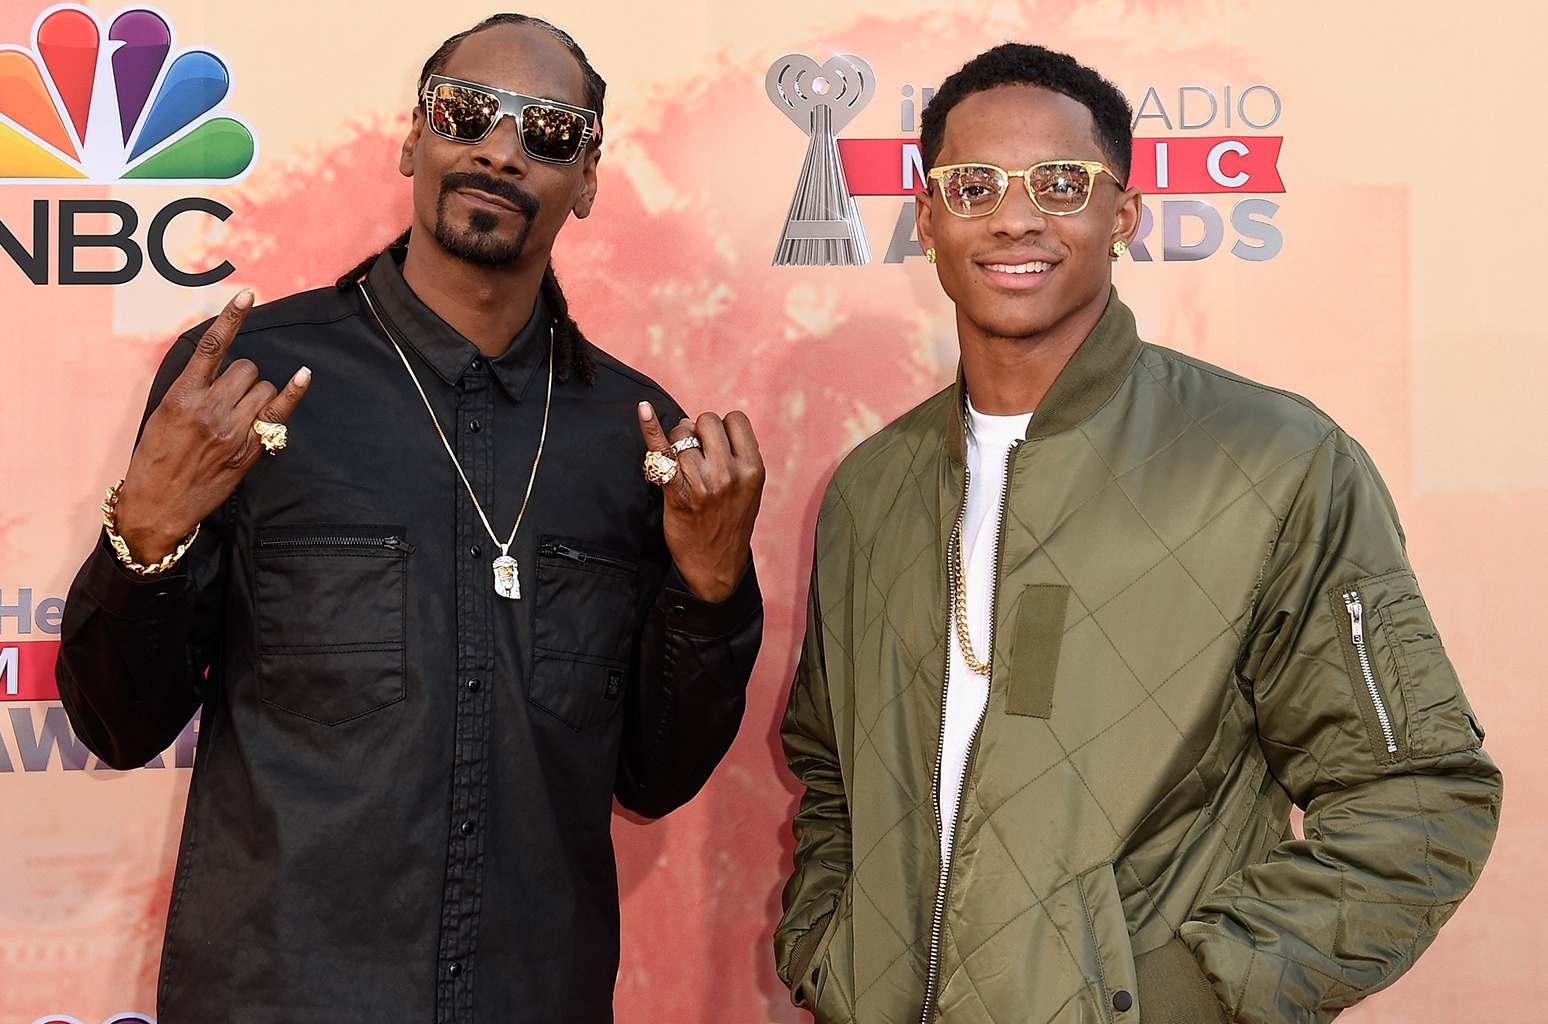 Snoop Dogg’s Son Cordell Broadus Lands First Modeling Campaign